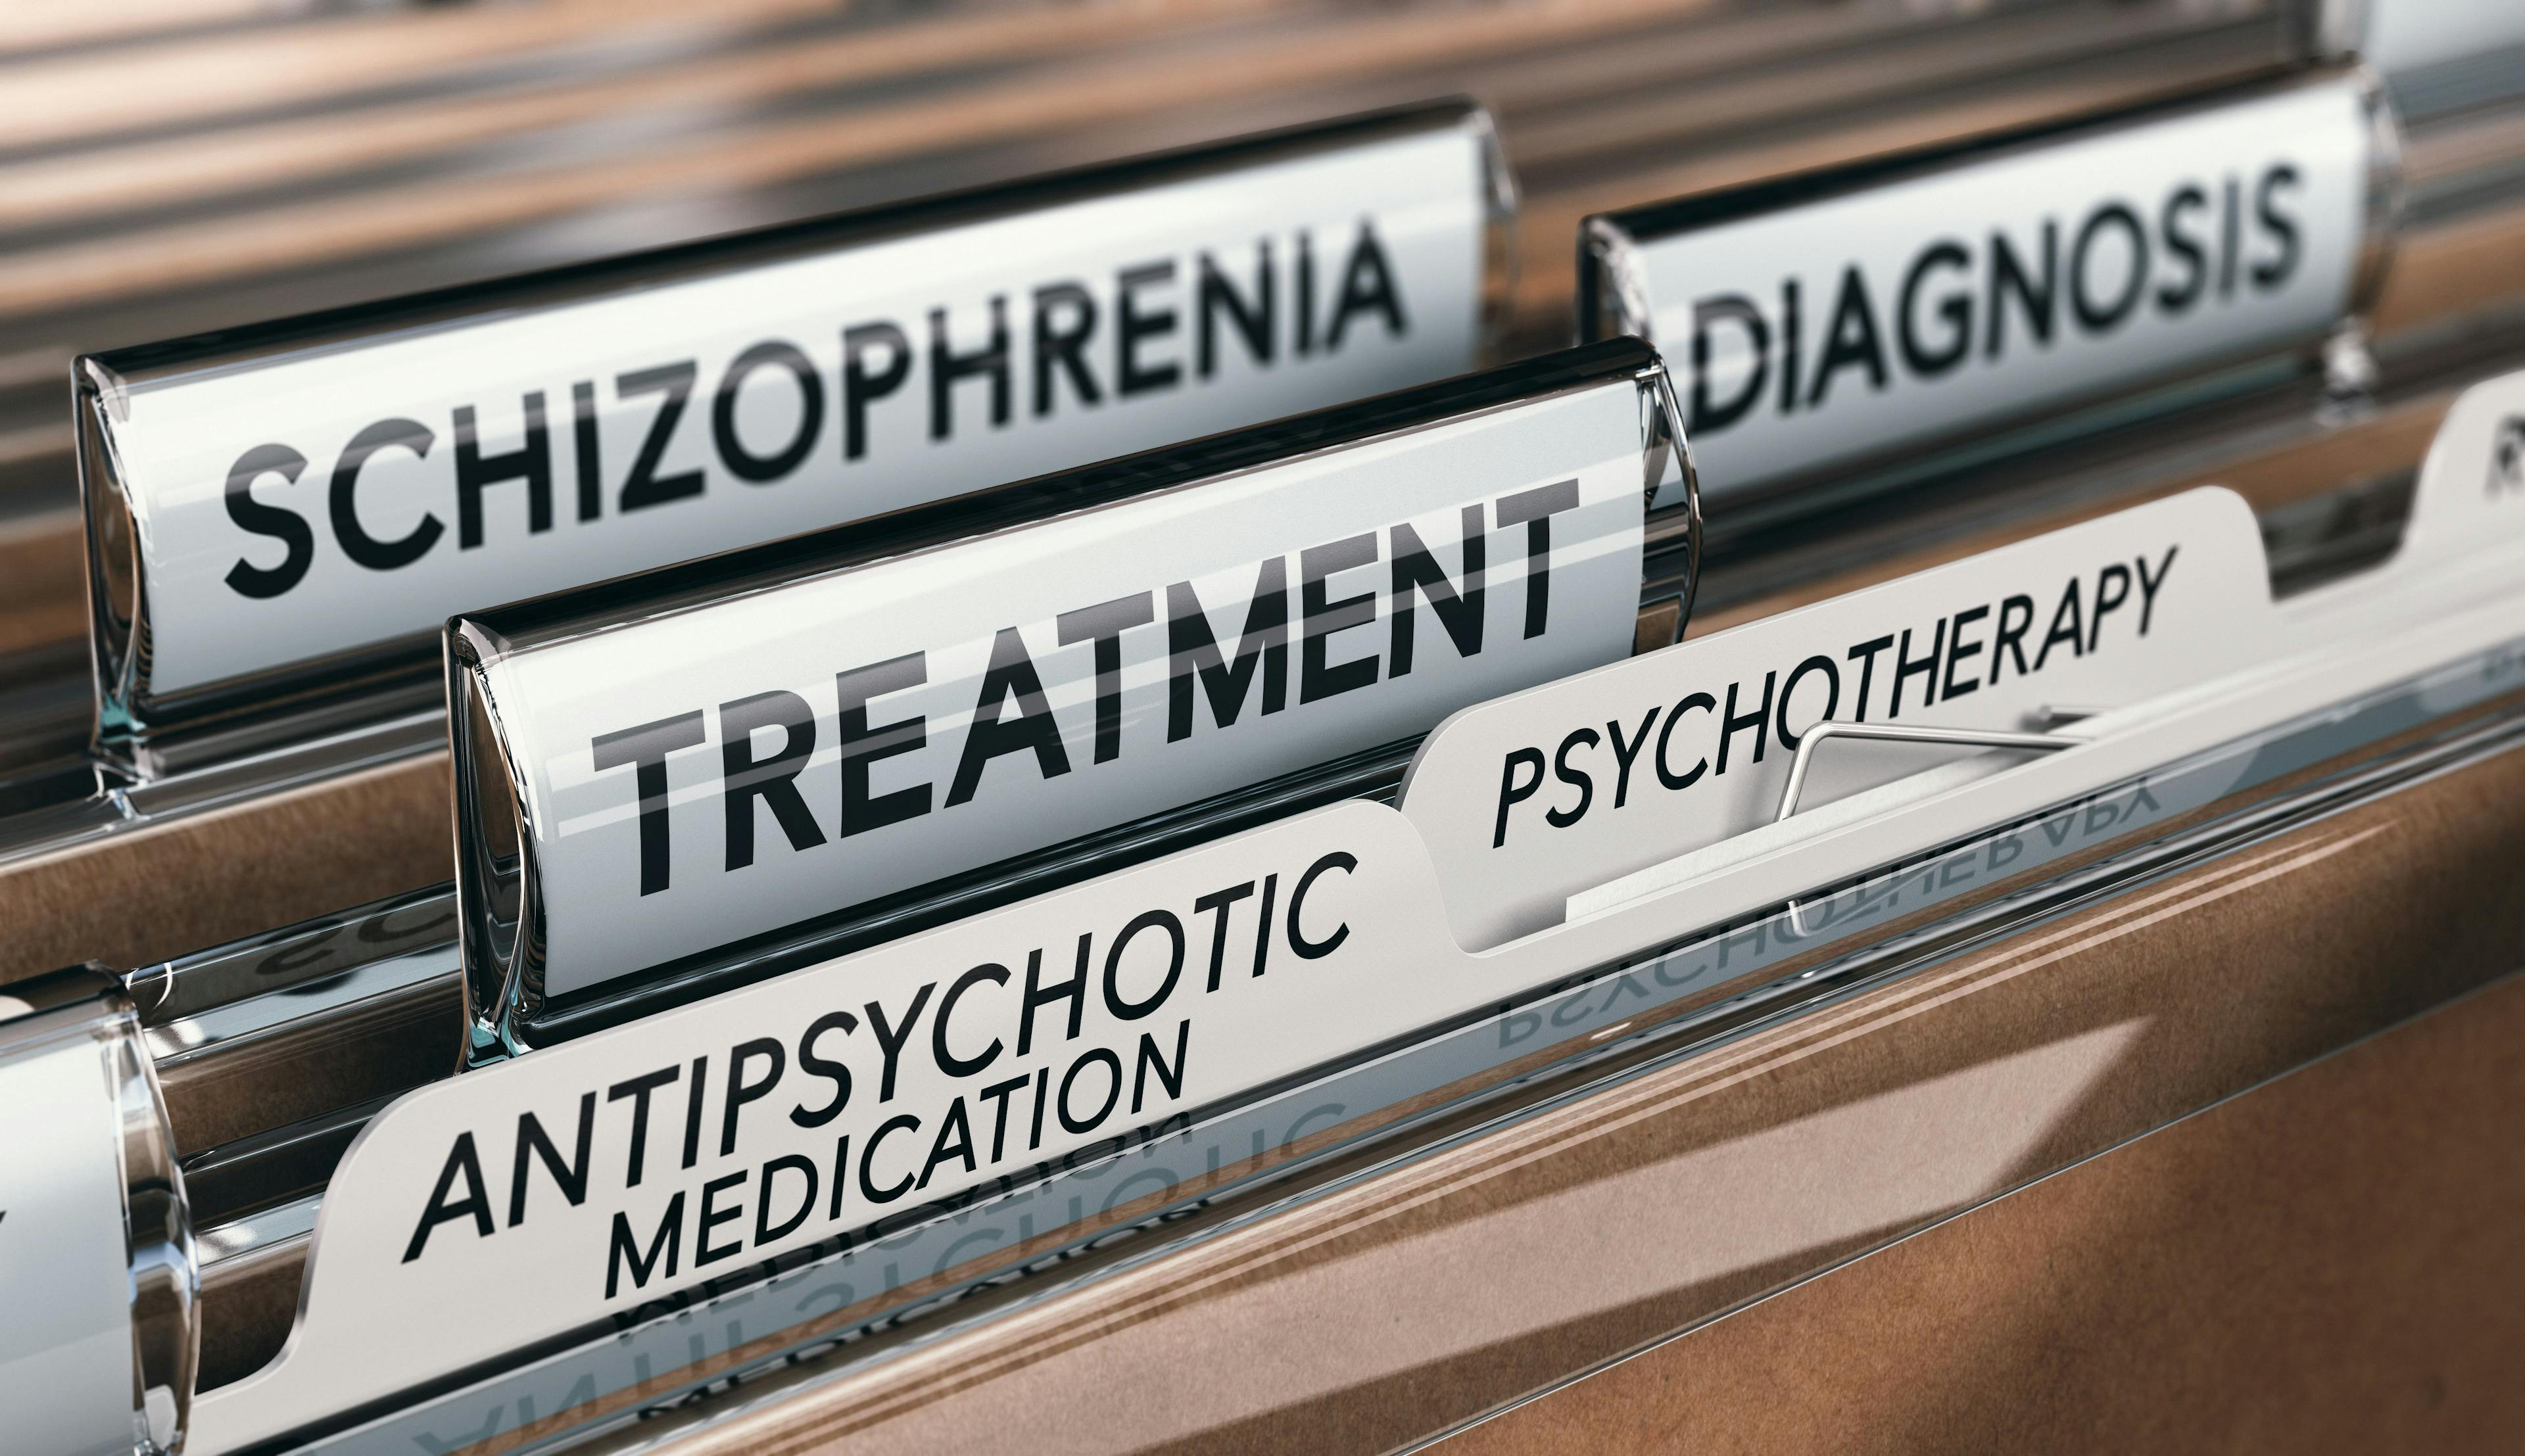 “If approved, KarXT would represent a new mechanism of action to treat schizophrenia, which would be the first new mechanism potentially in decades.”